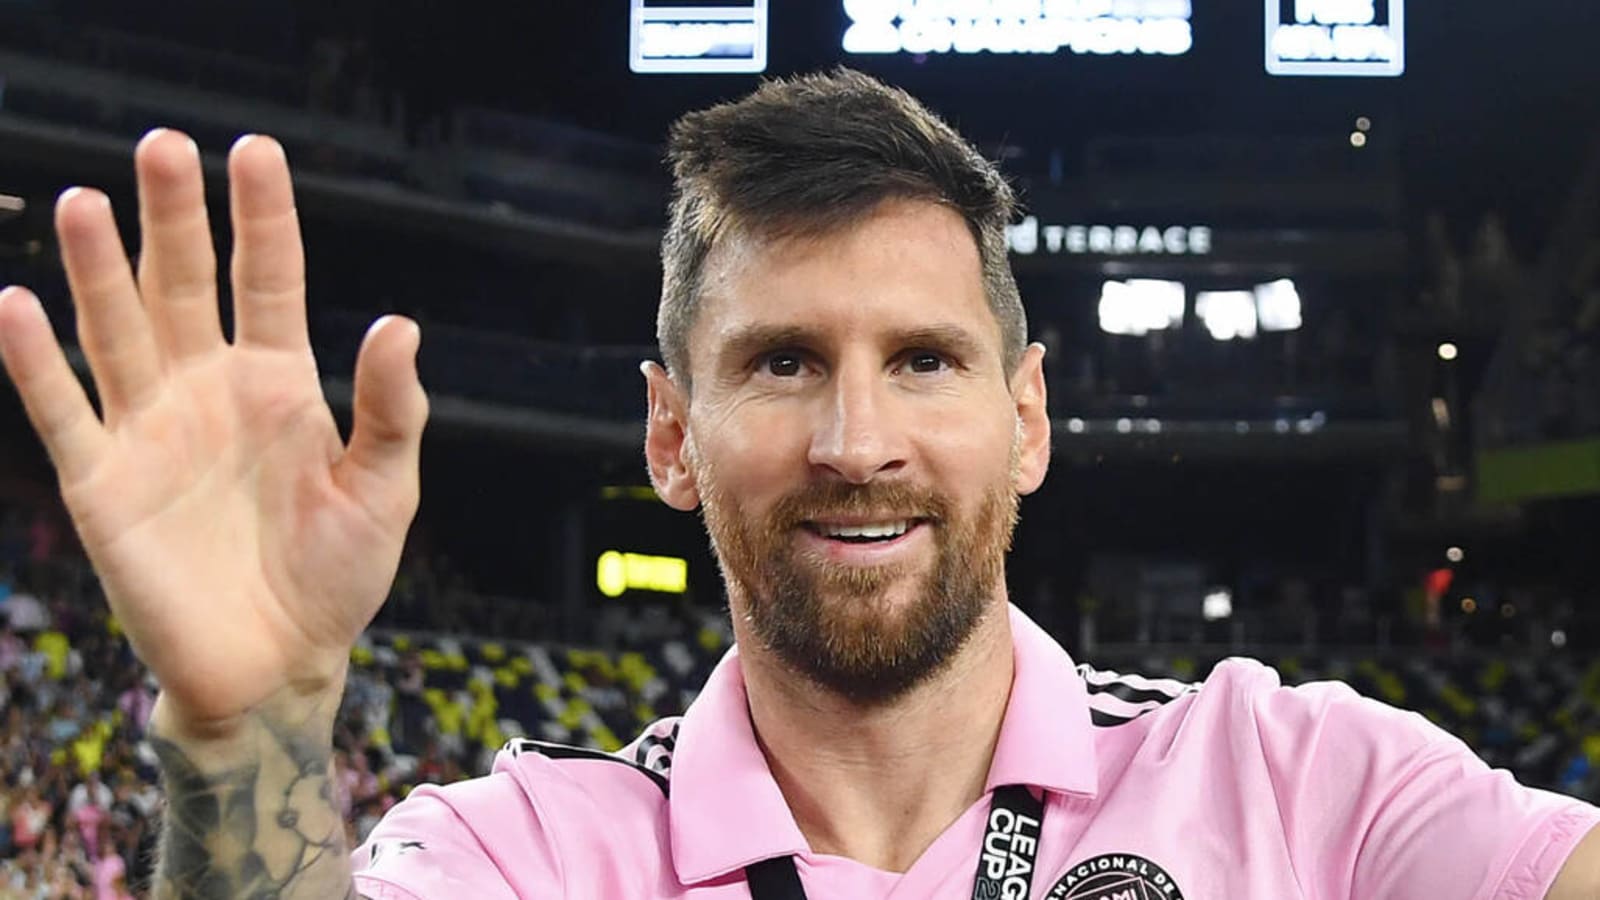 Messi's Leagues Cup victory gains impressive audience